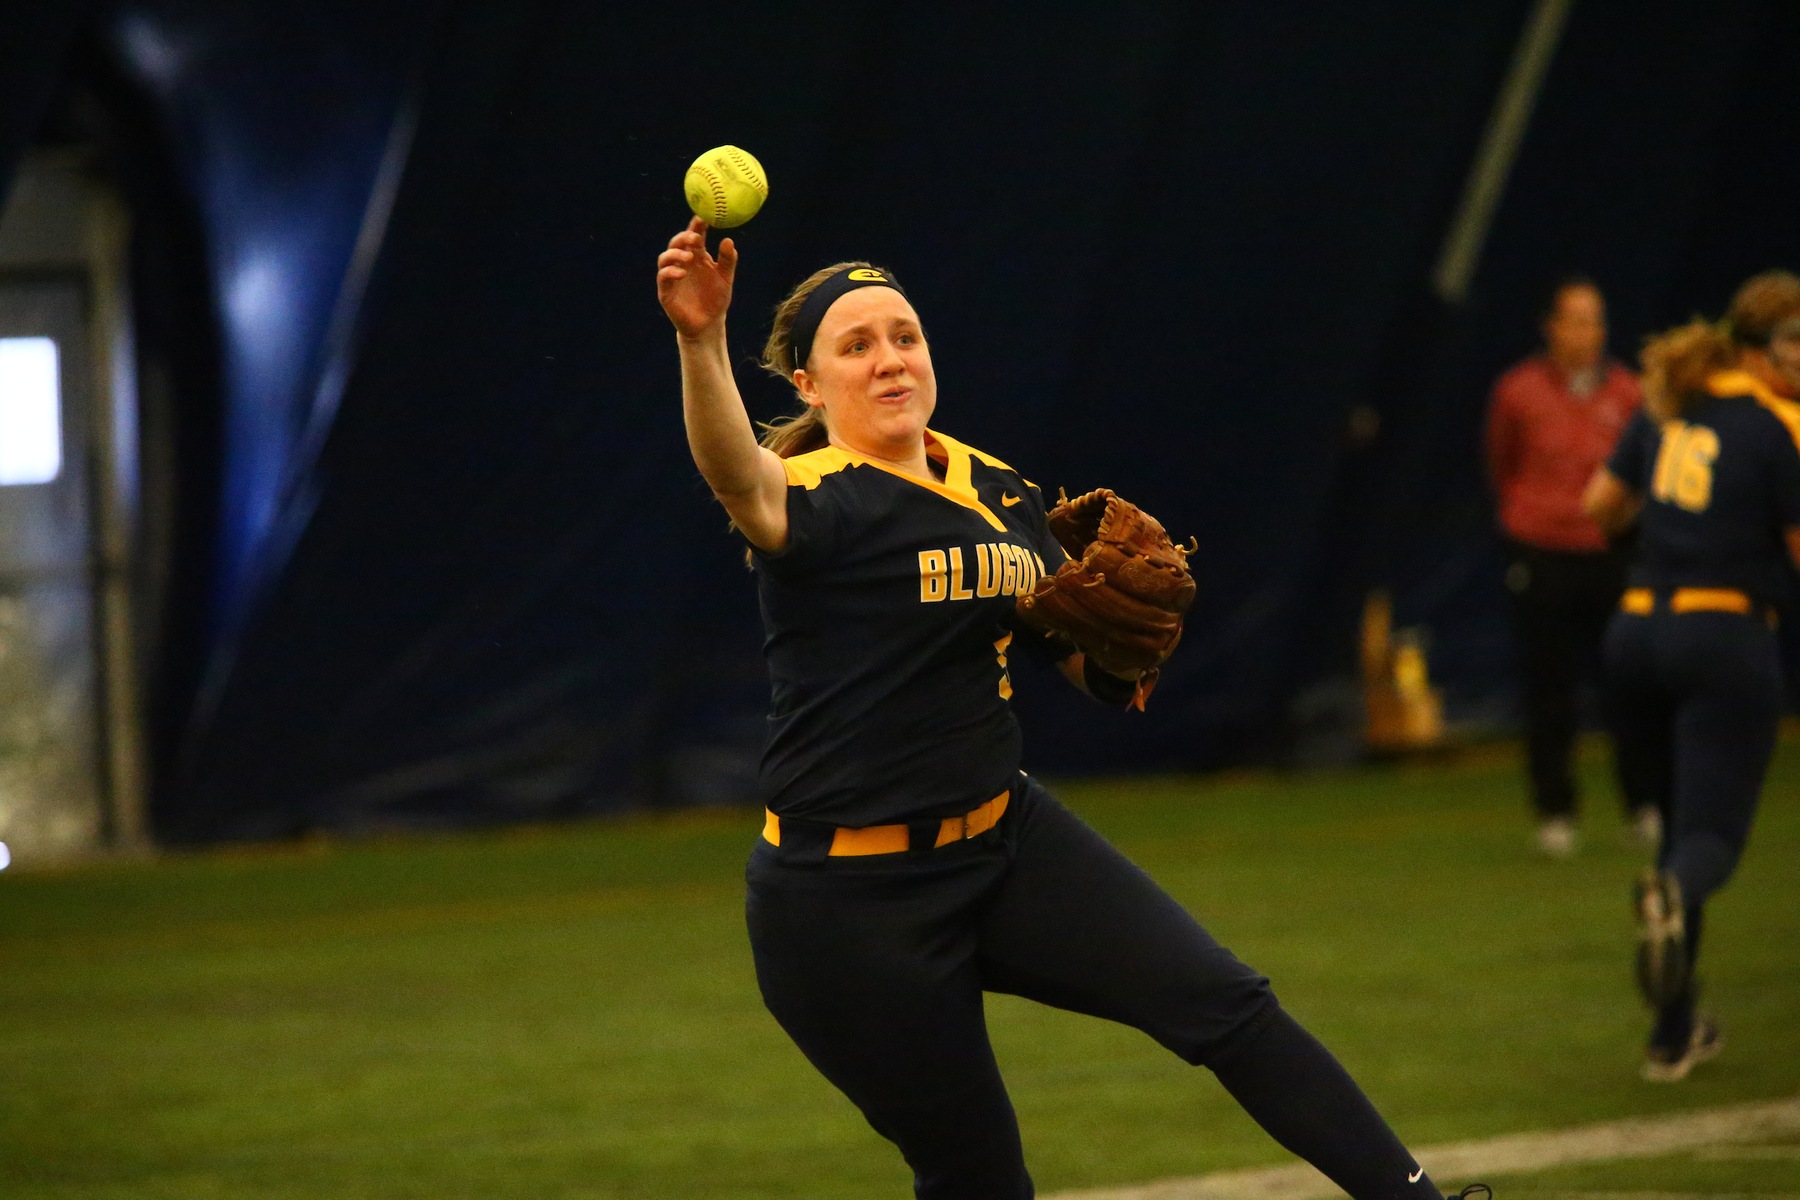 Blugolds fall late to Hope College, bounce back with win over Bowdoin College